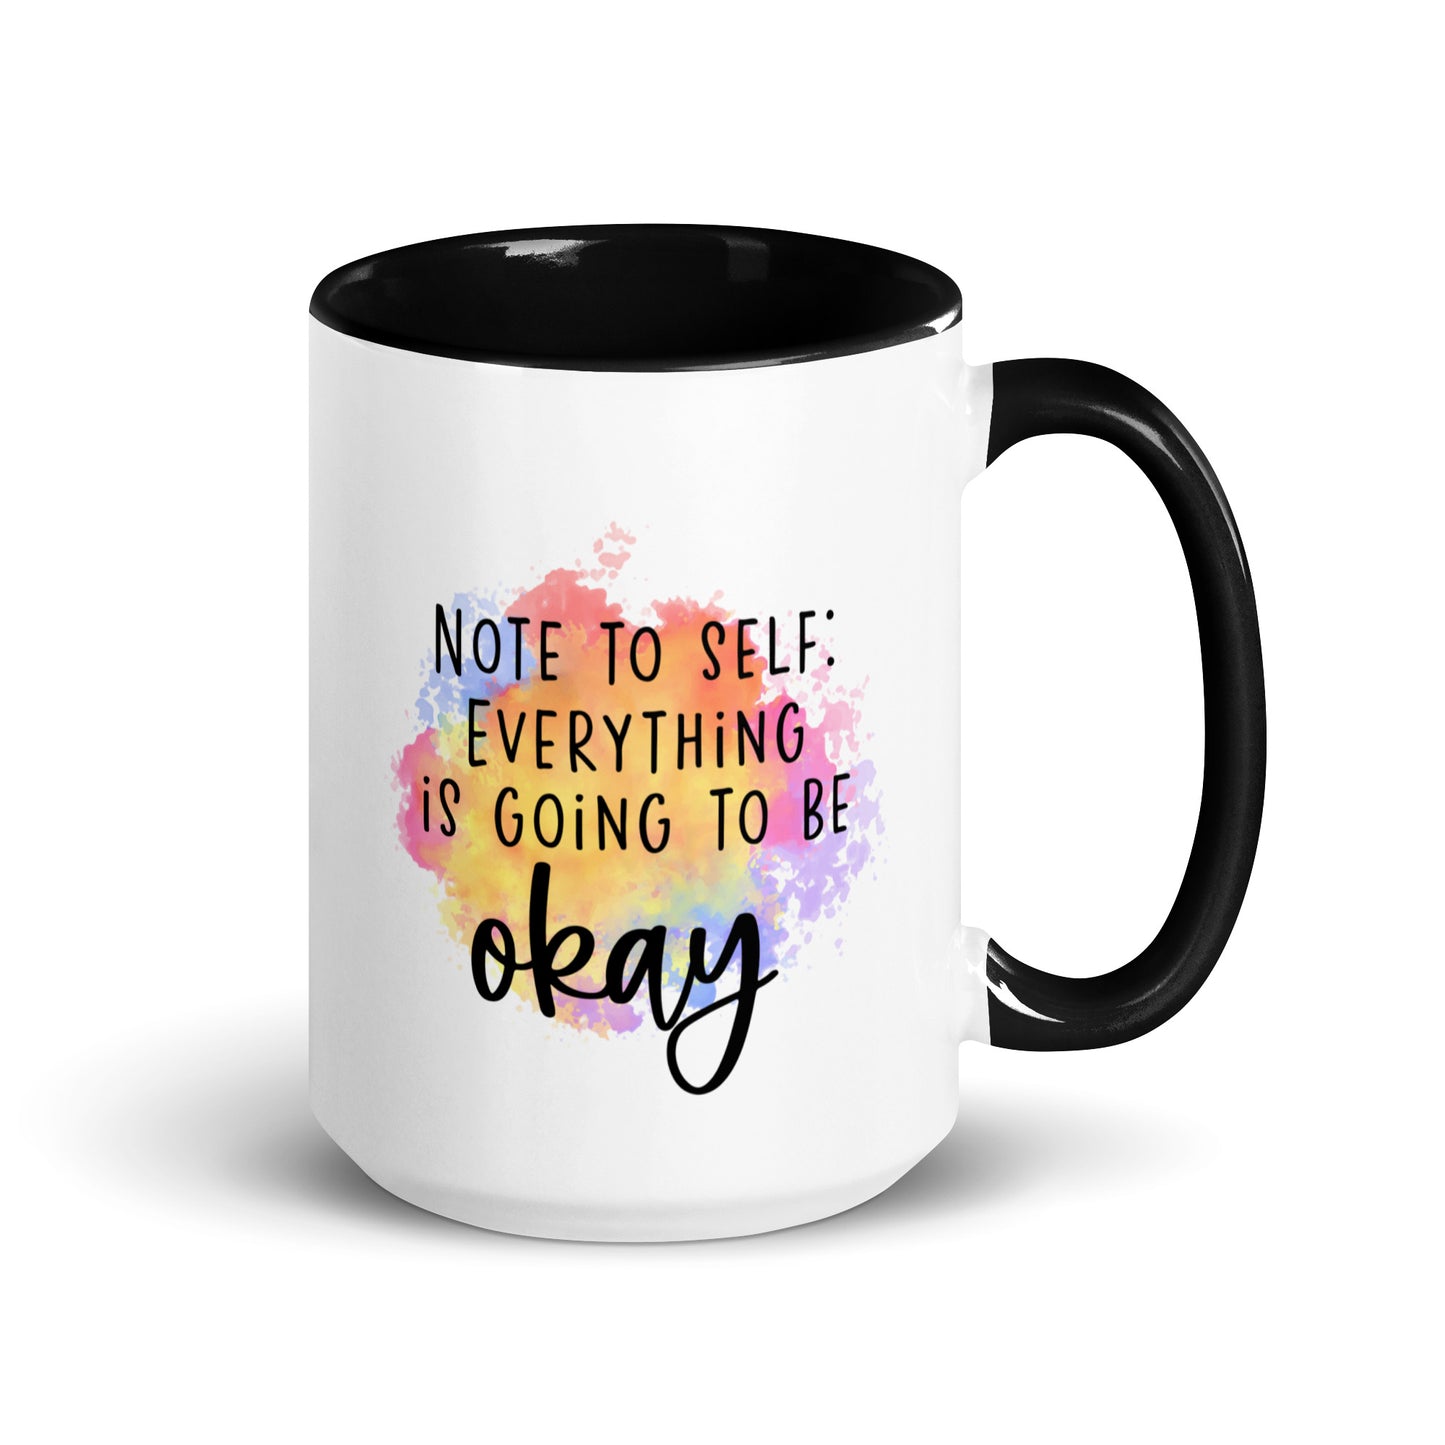 Note to Self Mug in two sizes